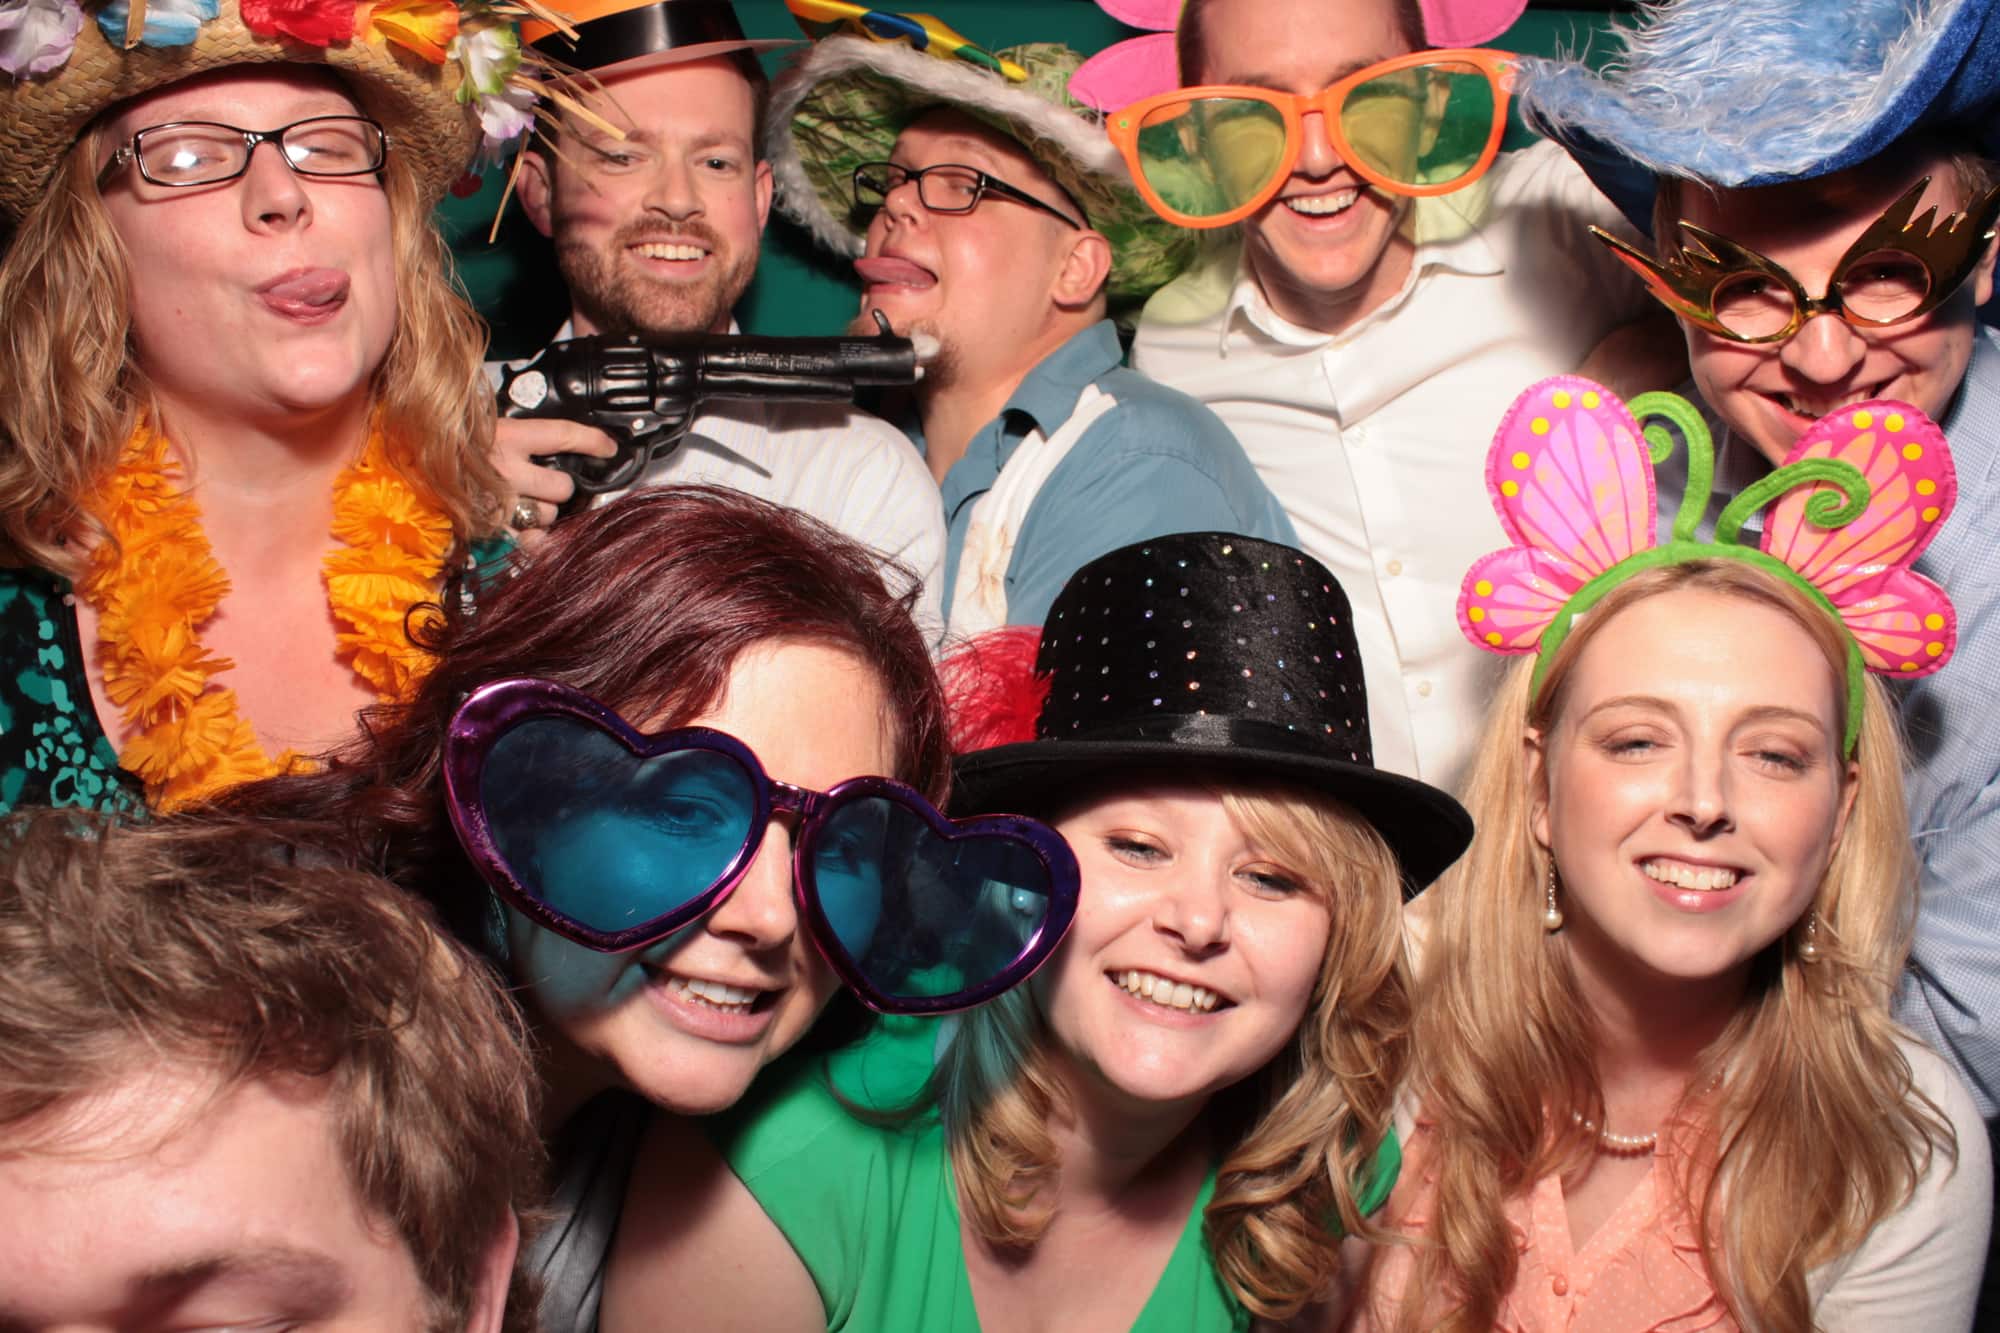 Austin-Photo Booth Rental-Weddings-Props-Fun-No. 1-Photography-Colorful-Memories-Hats